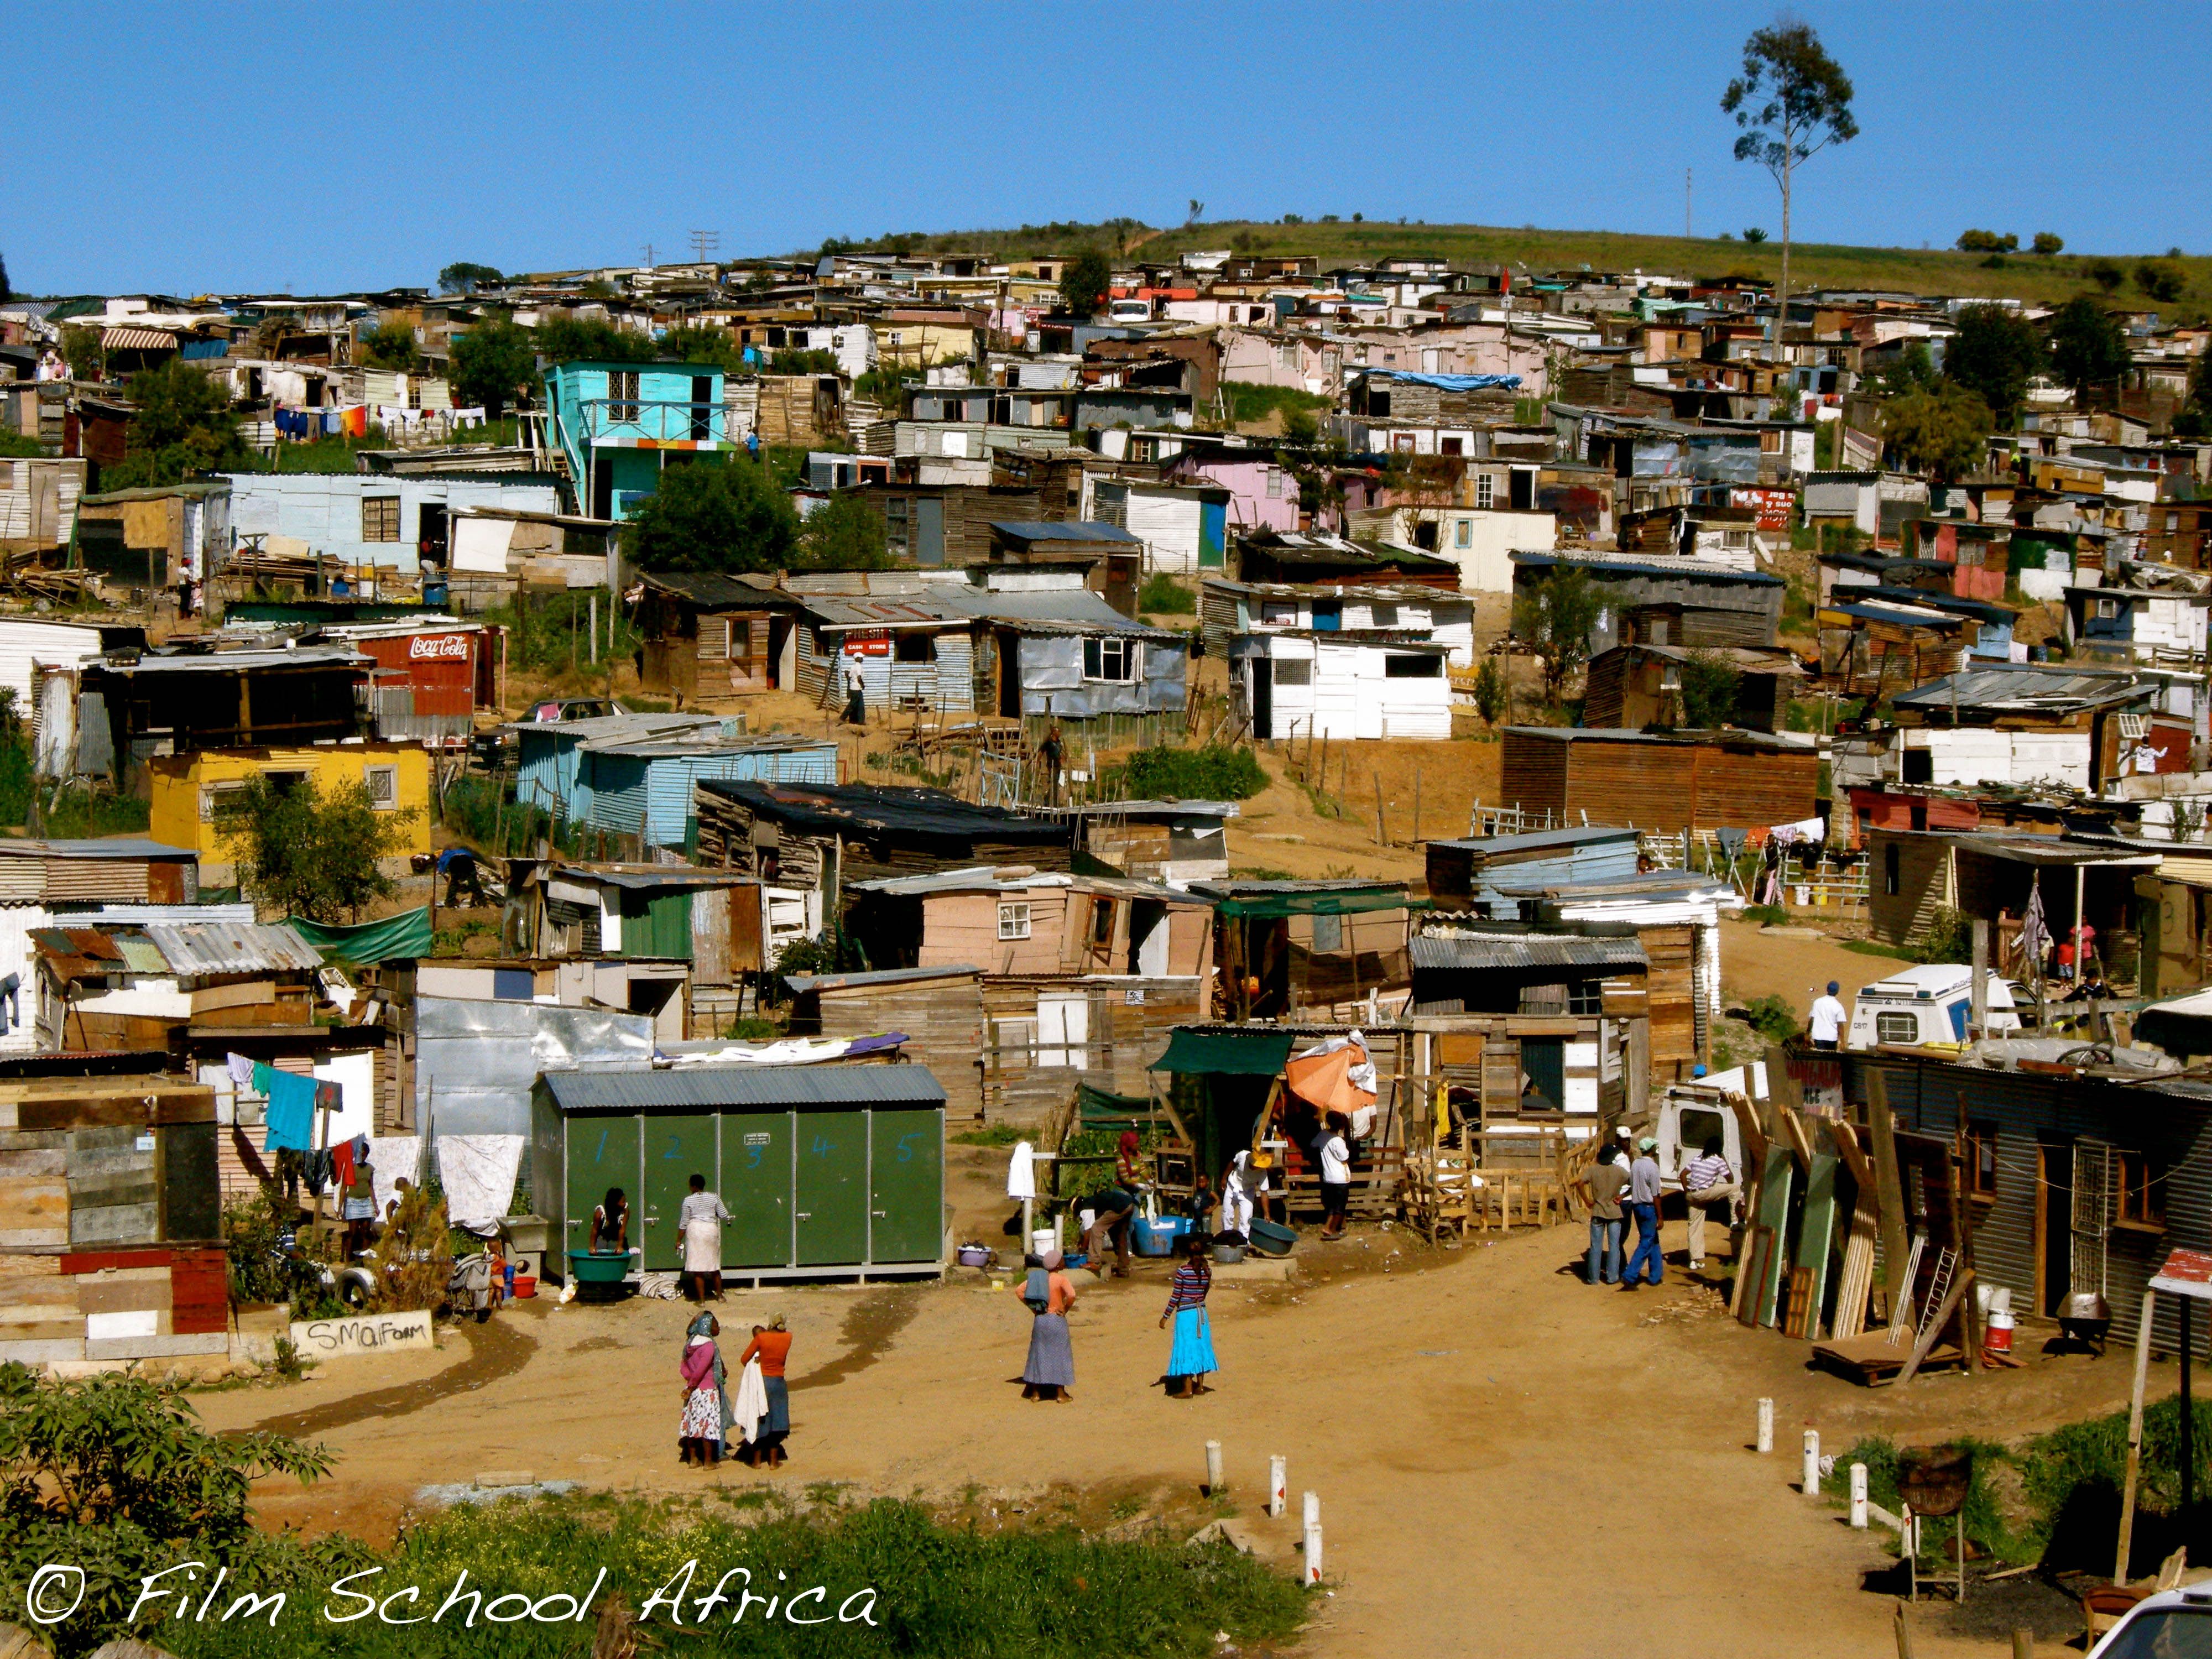 The township of Kayamandi, South Africa. www.filmschoolafrica.org ...